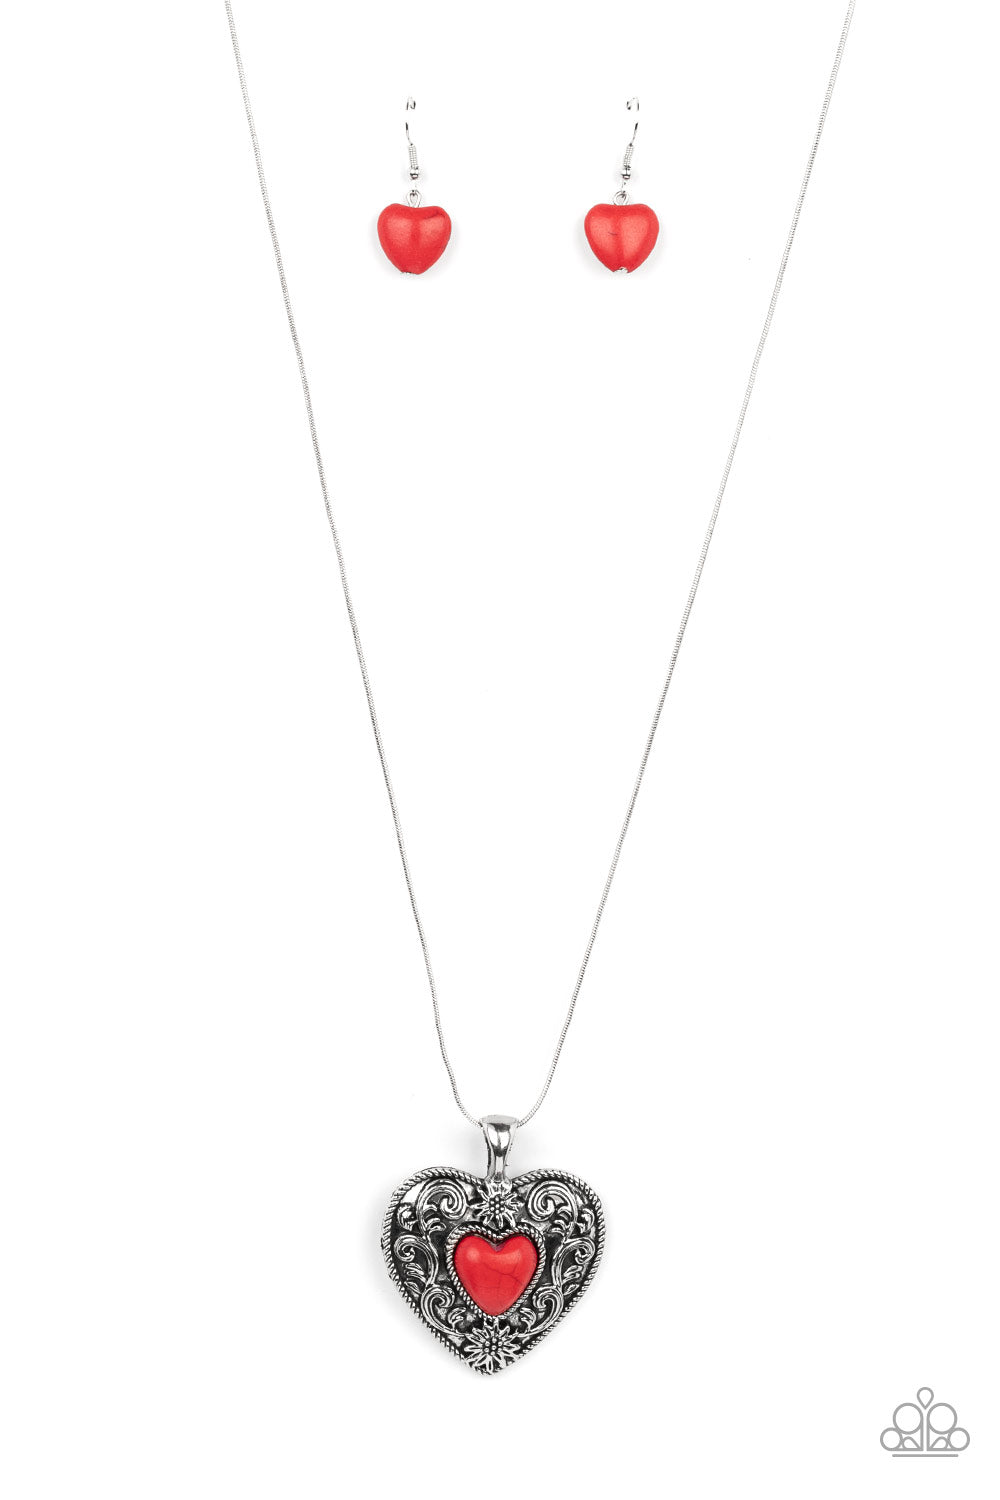 Wholeheartedly Whimsical - red - Paparazzi necklace